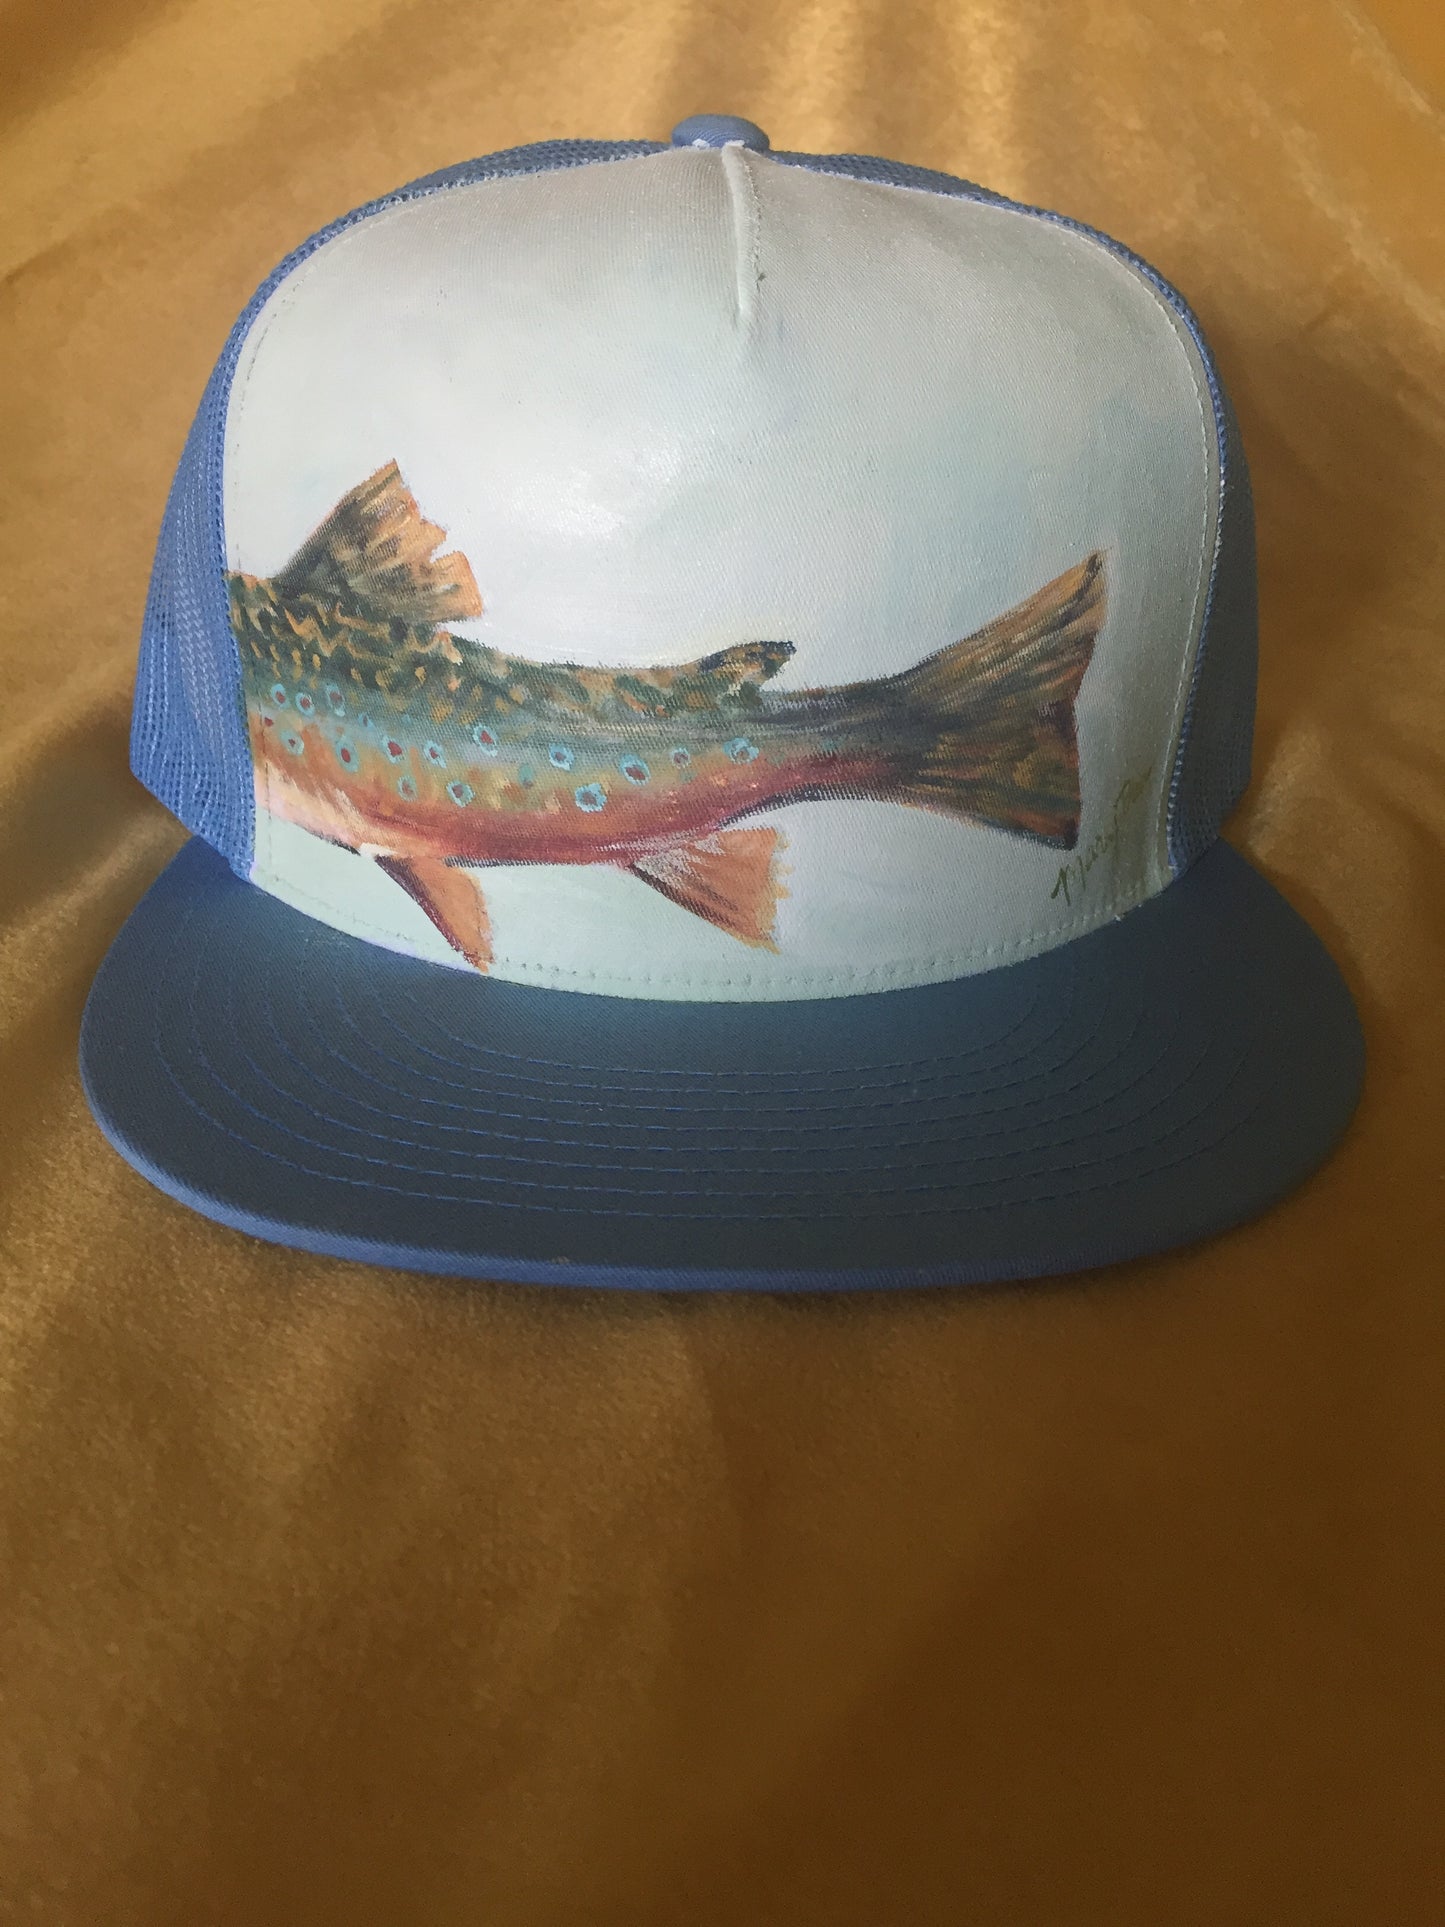 "Fish Tale" Hand Painted on Baby Blue Snapback Trucker Hat